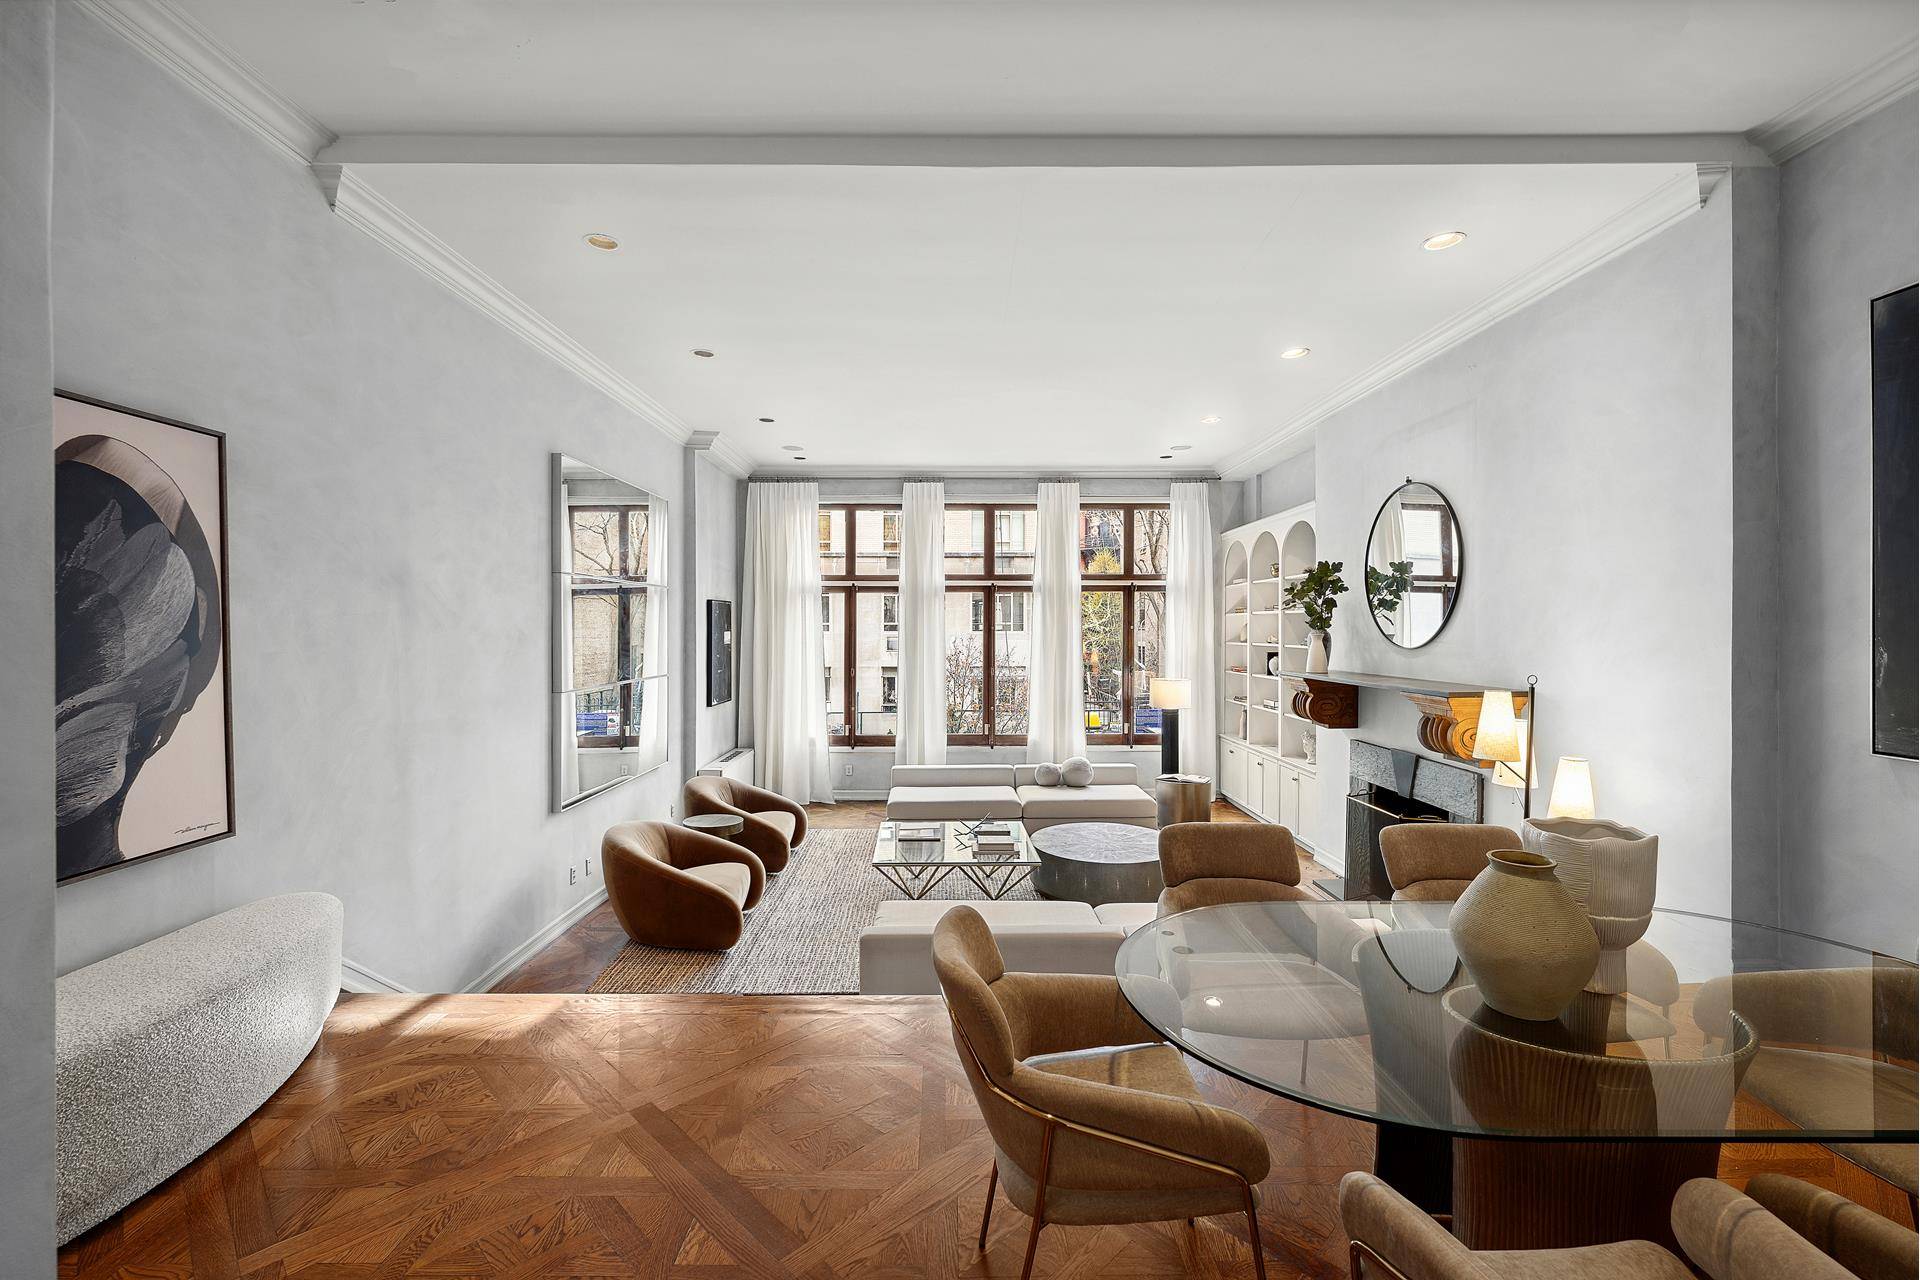 Private amp ; LuxuriousElevate your lifestyle here at 6 E68Experience luxurious living in this chic Upper East Side loft style residence, located just steps from Central Park.